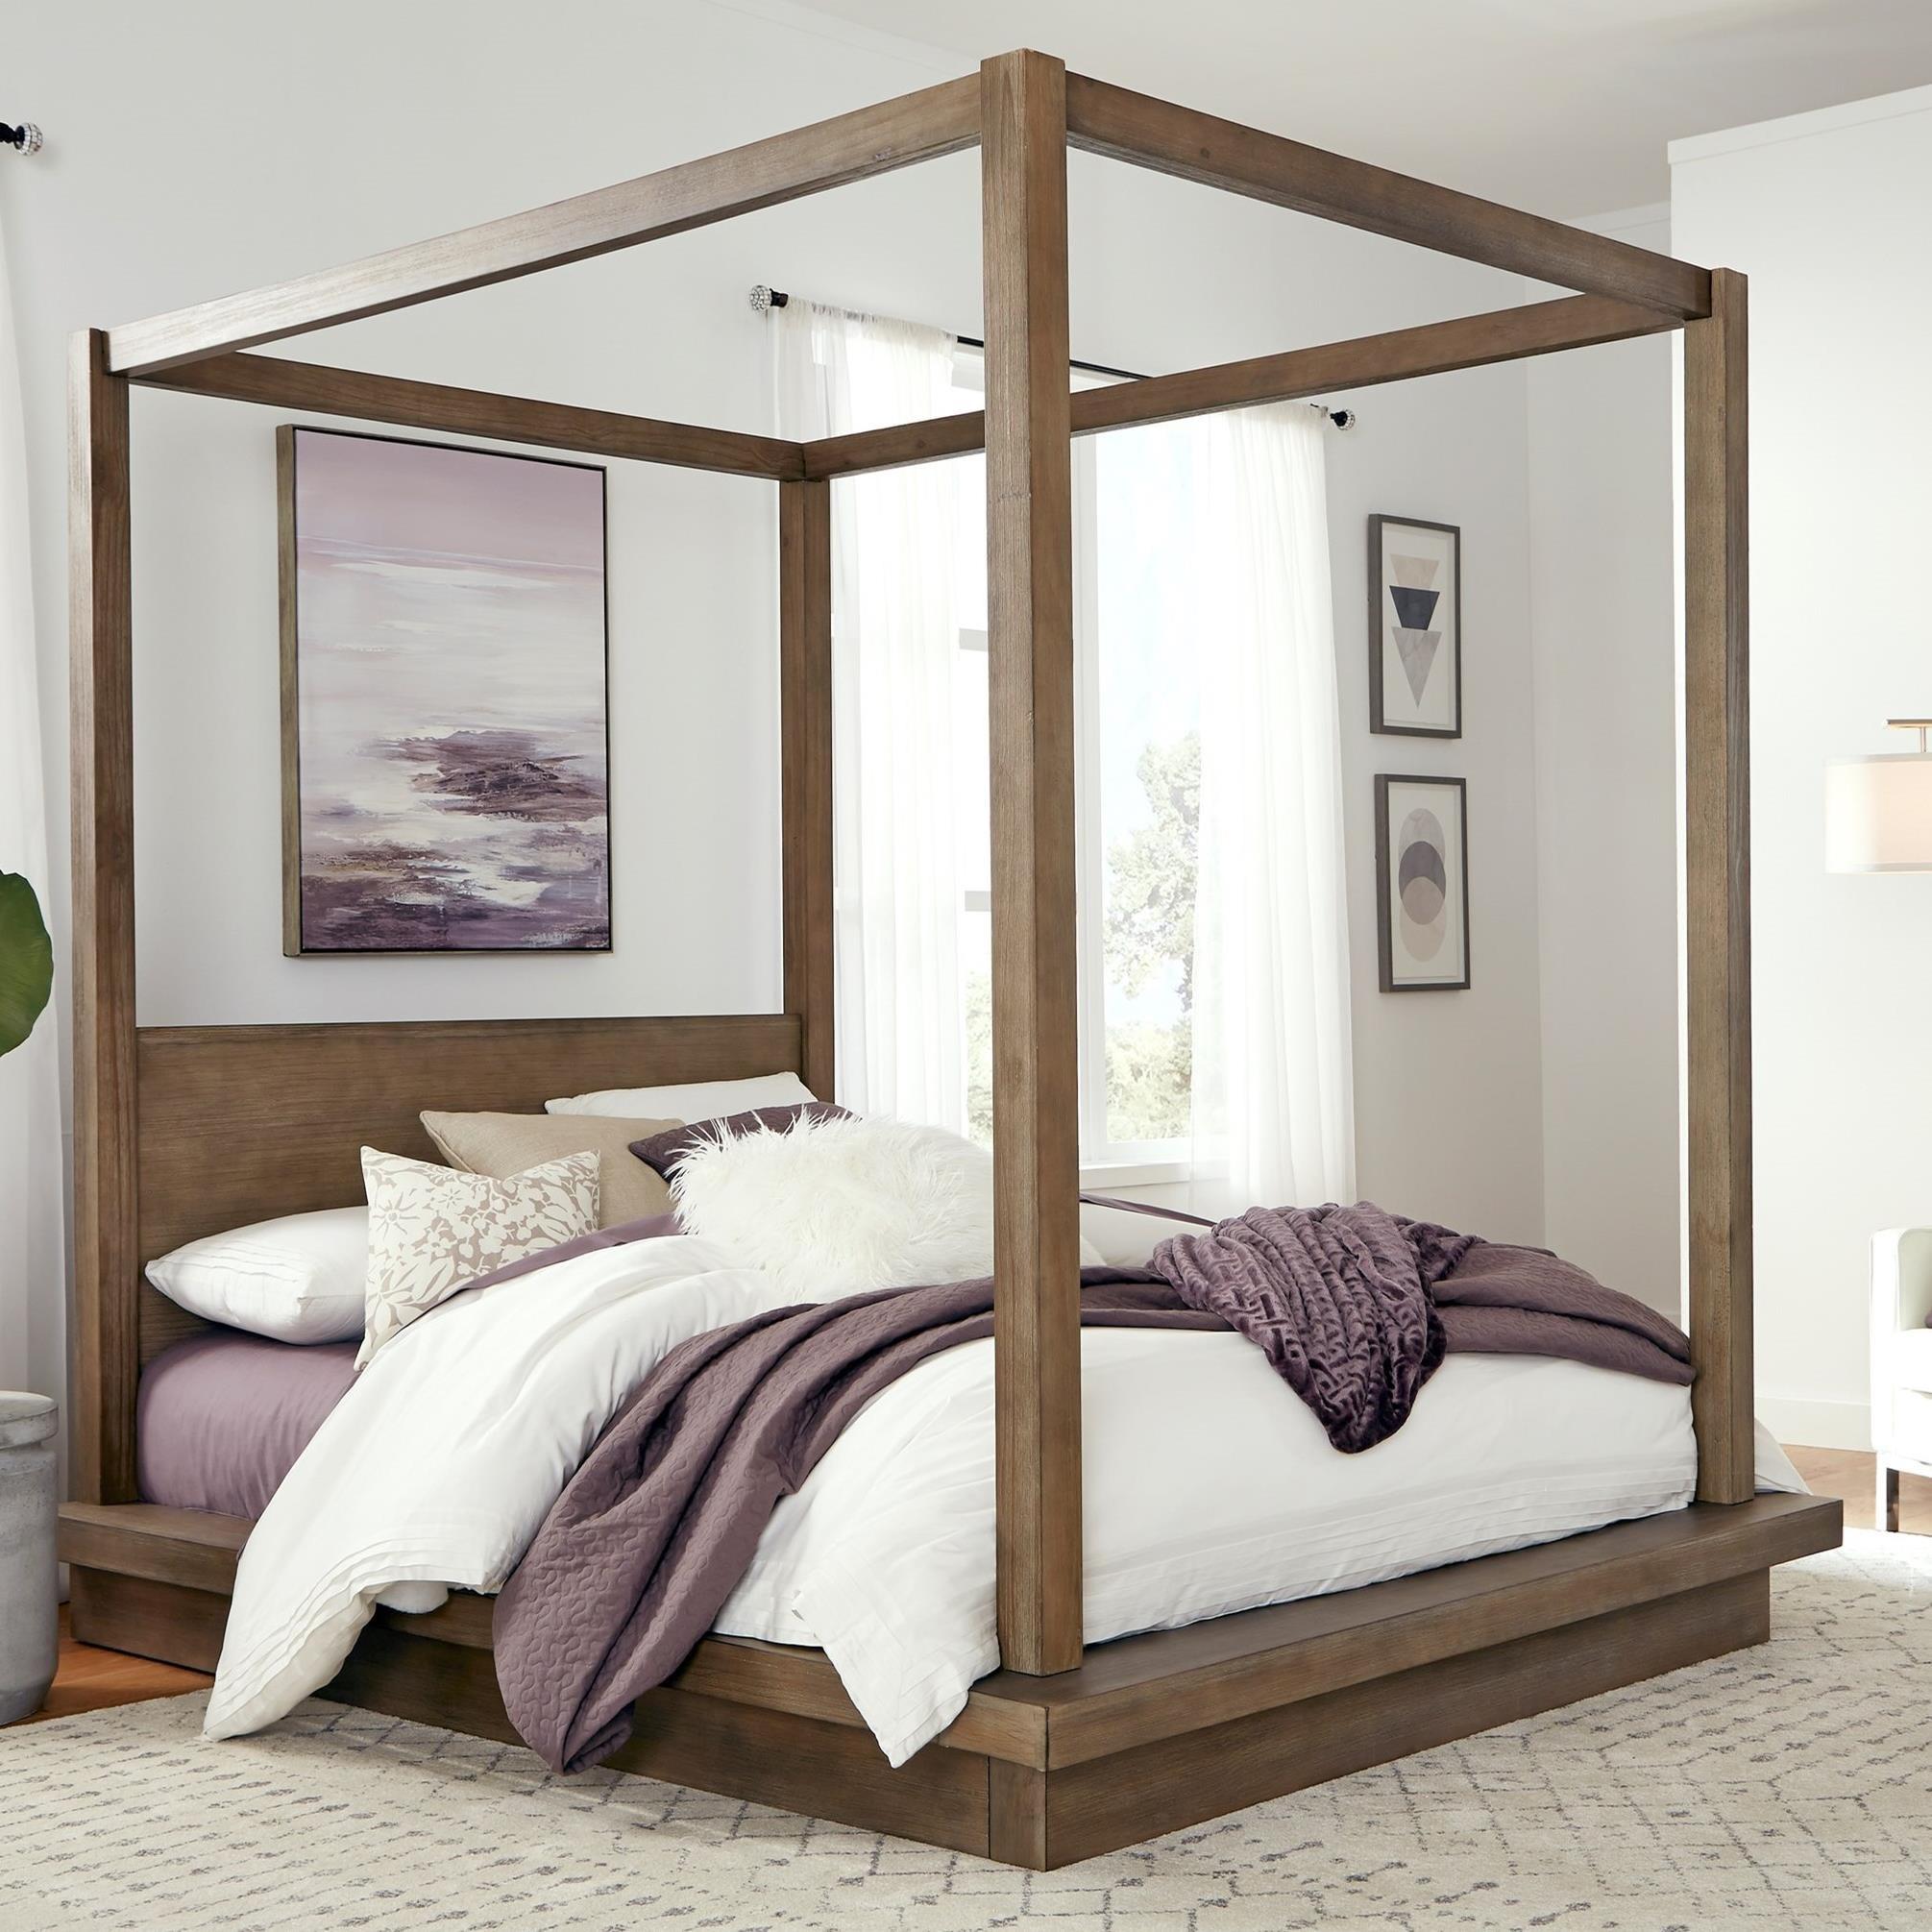 

    
MELBOURNE CANOPY Canopy Bedroom Set
